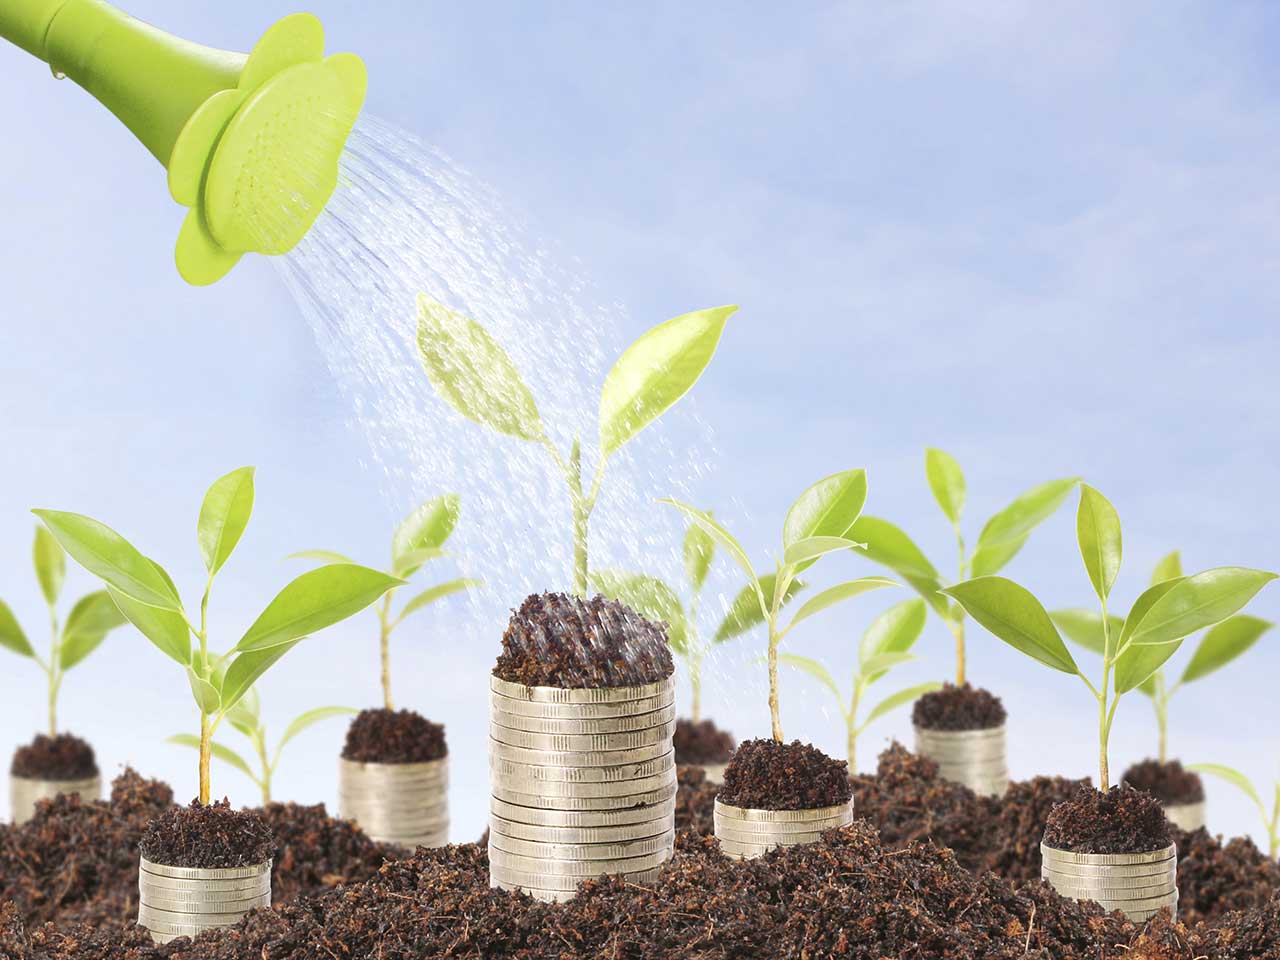 Watering can pouring water onto shoots springing from piles of coins to represent growing investments